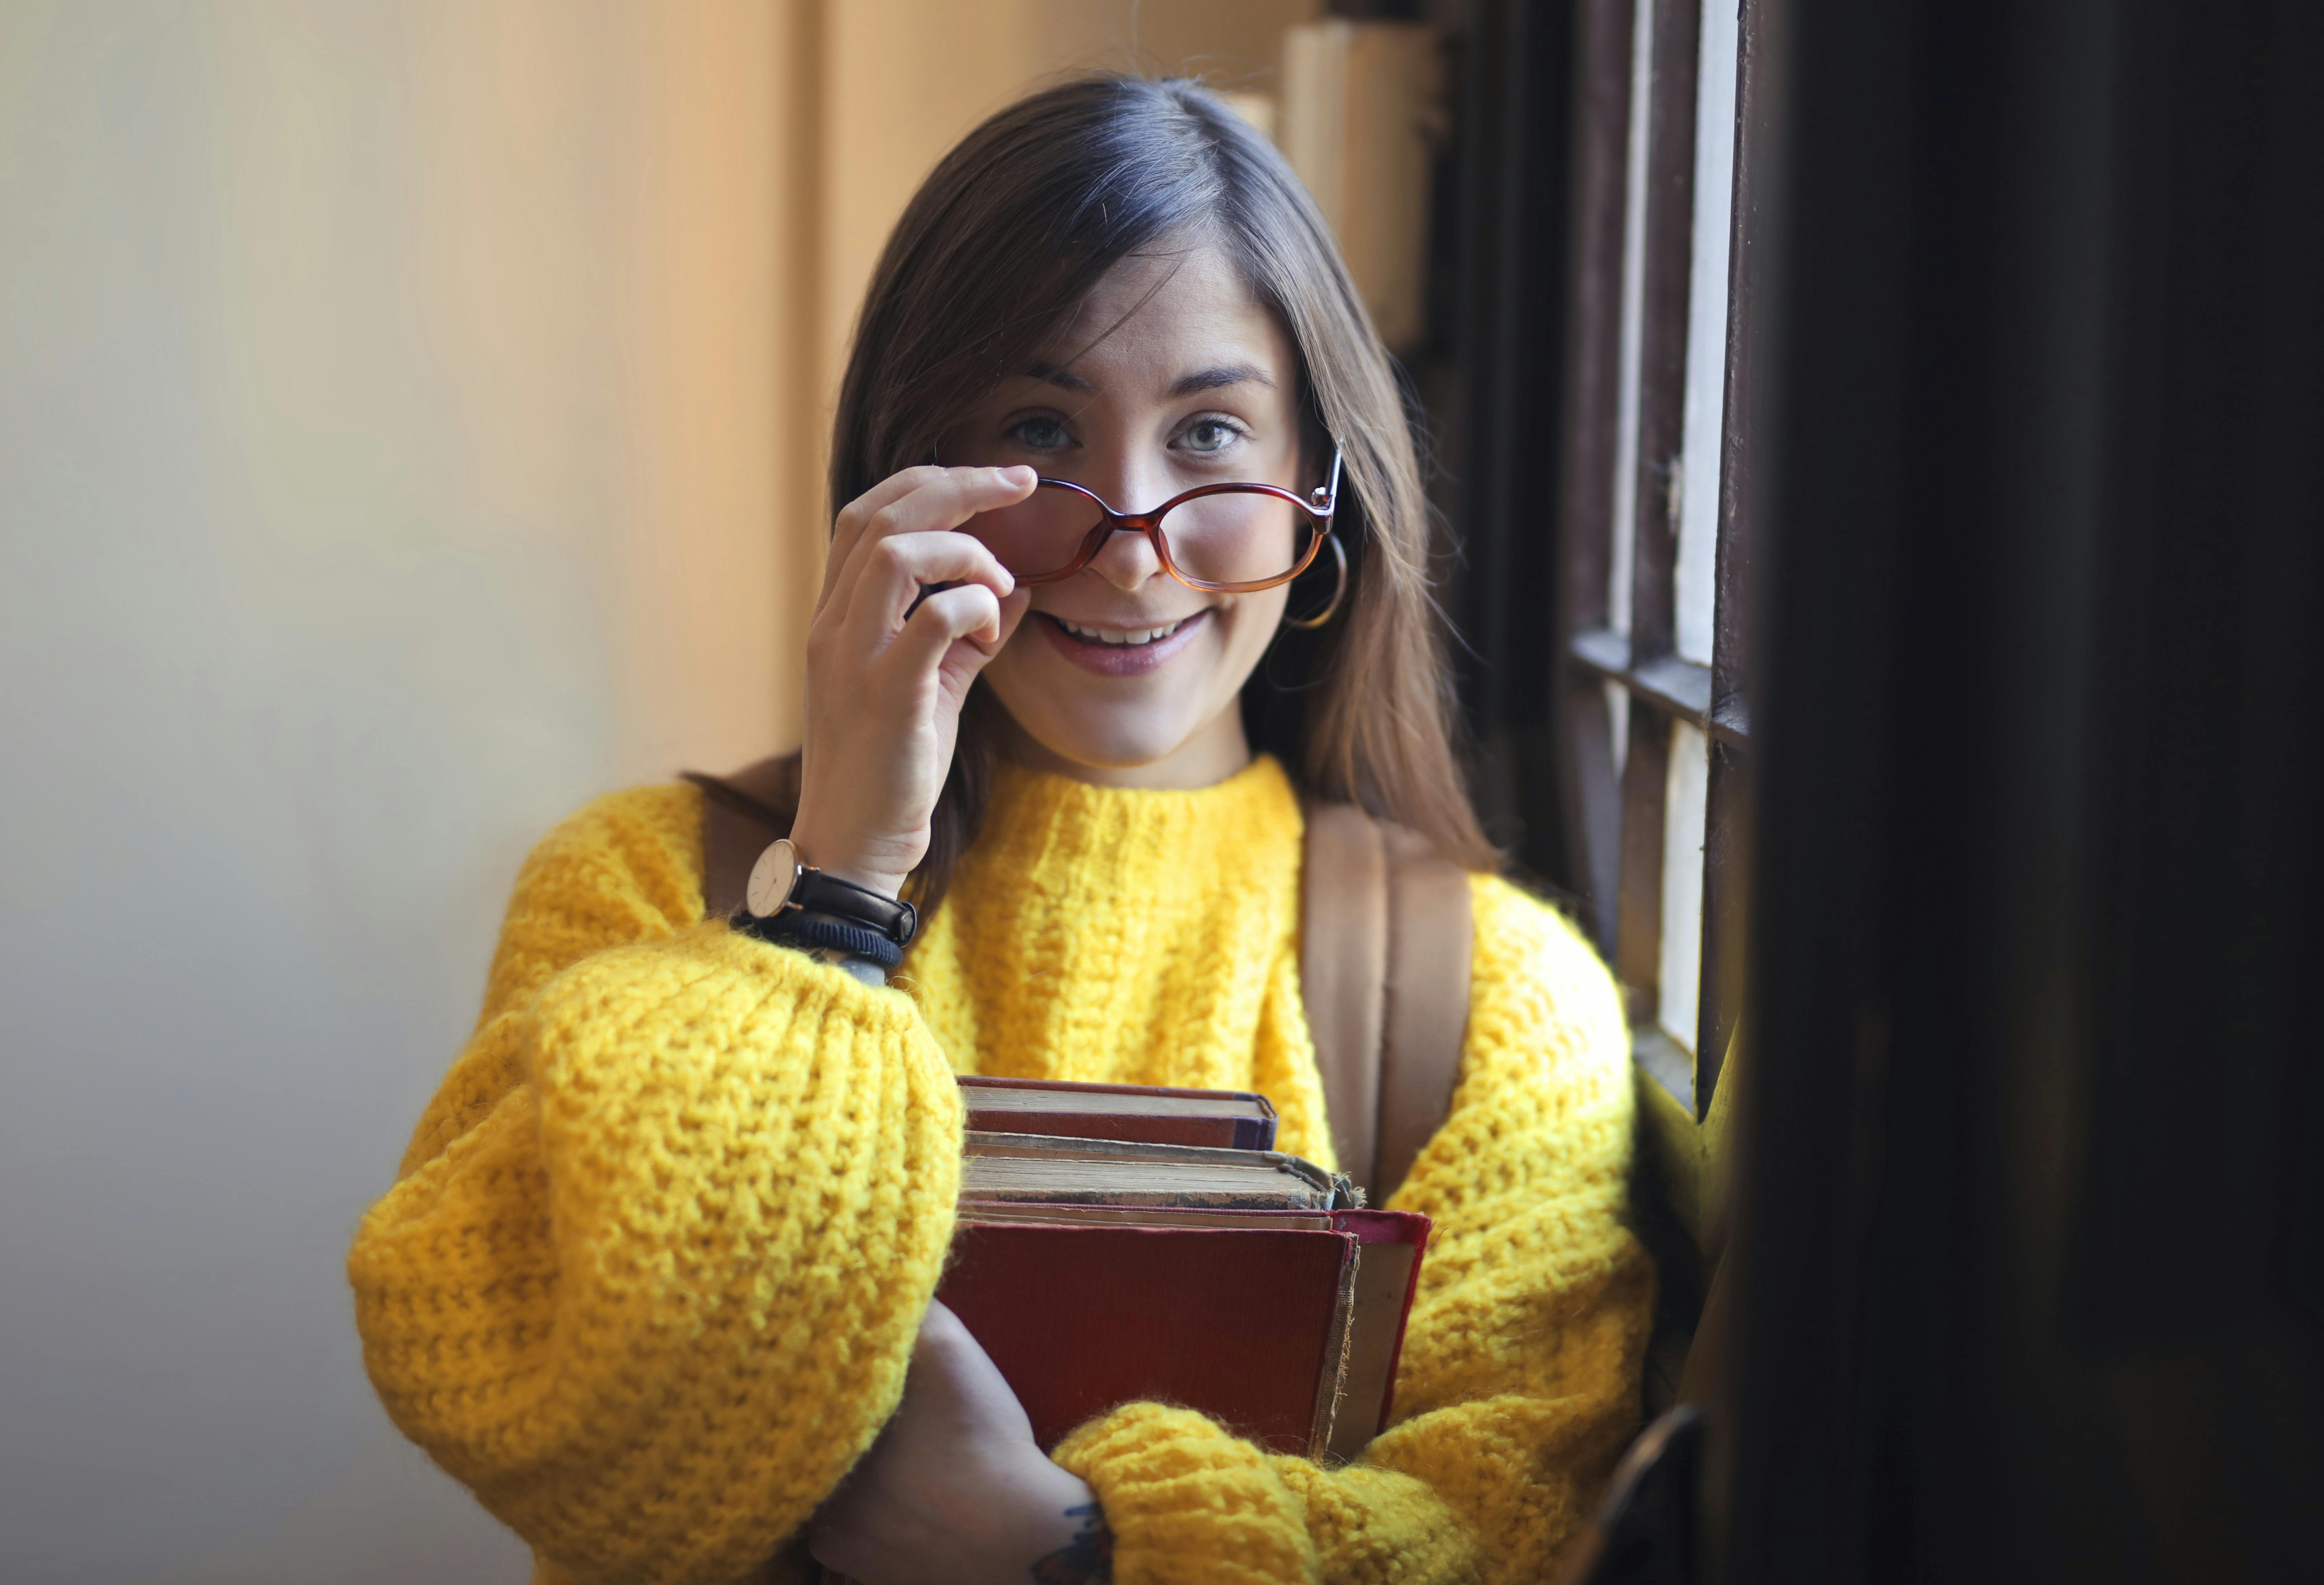 Smiling Brunette Woman Wearing a Yellow Sweater, and Playing